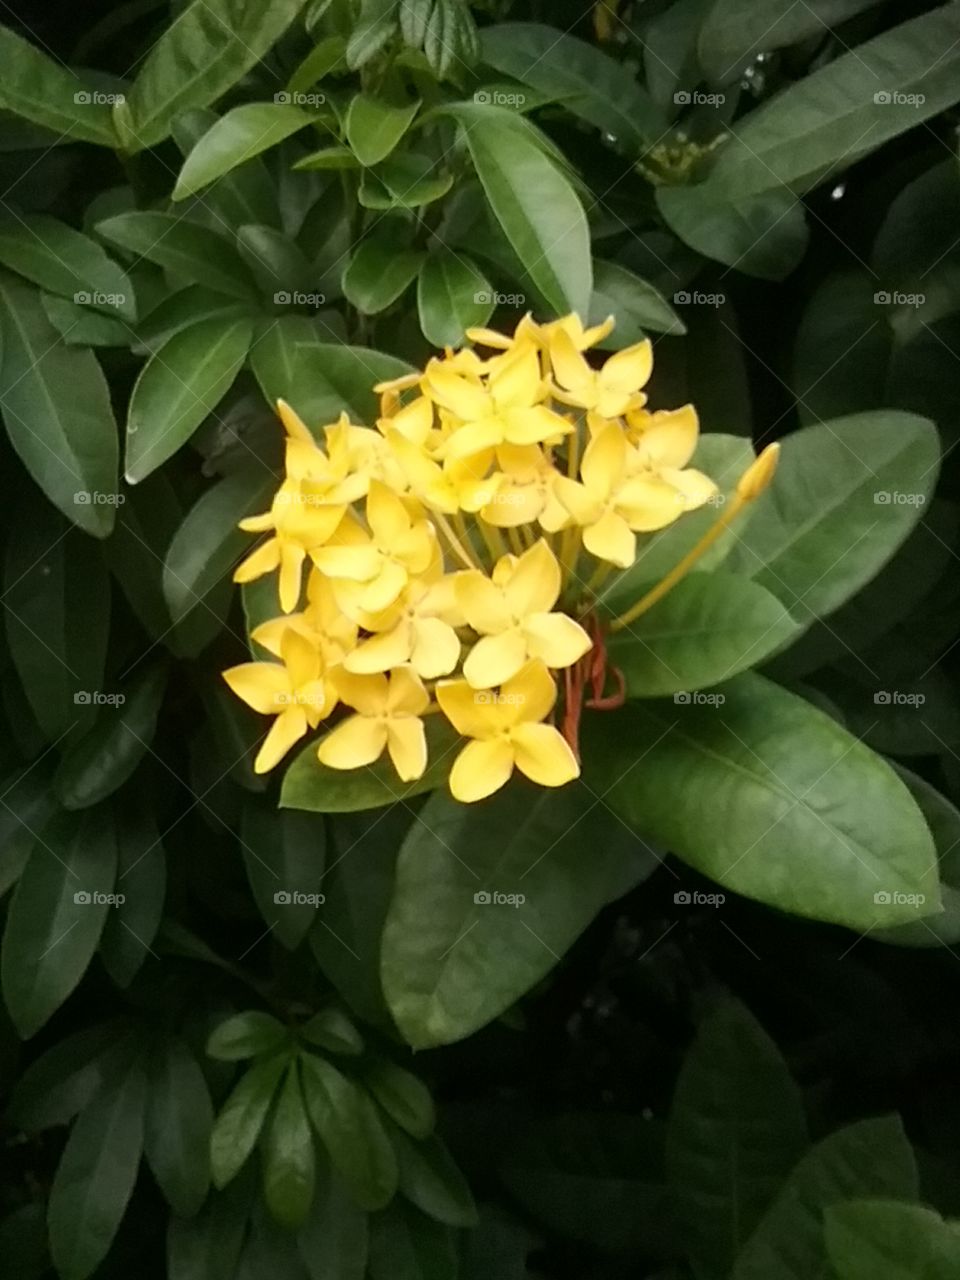 Beautiful lovely propical yellow ixora flowers from Thailand. Flower of intelligent. ดอกเข็มสีเหลือง